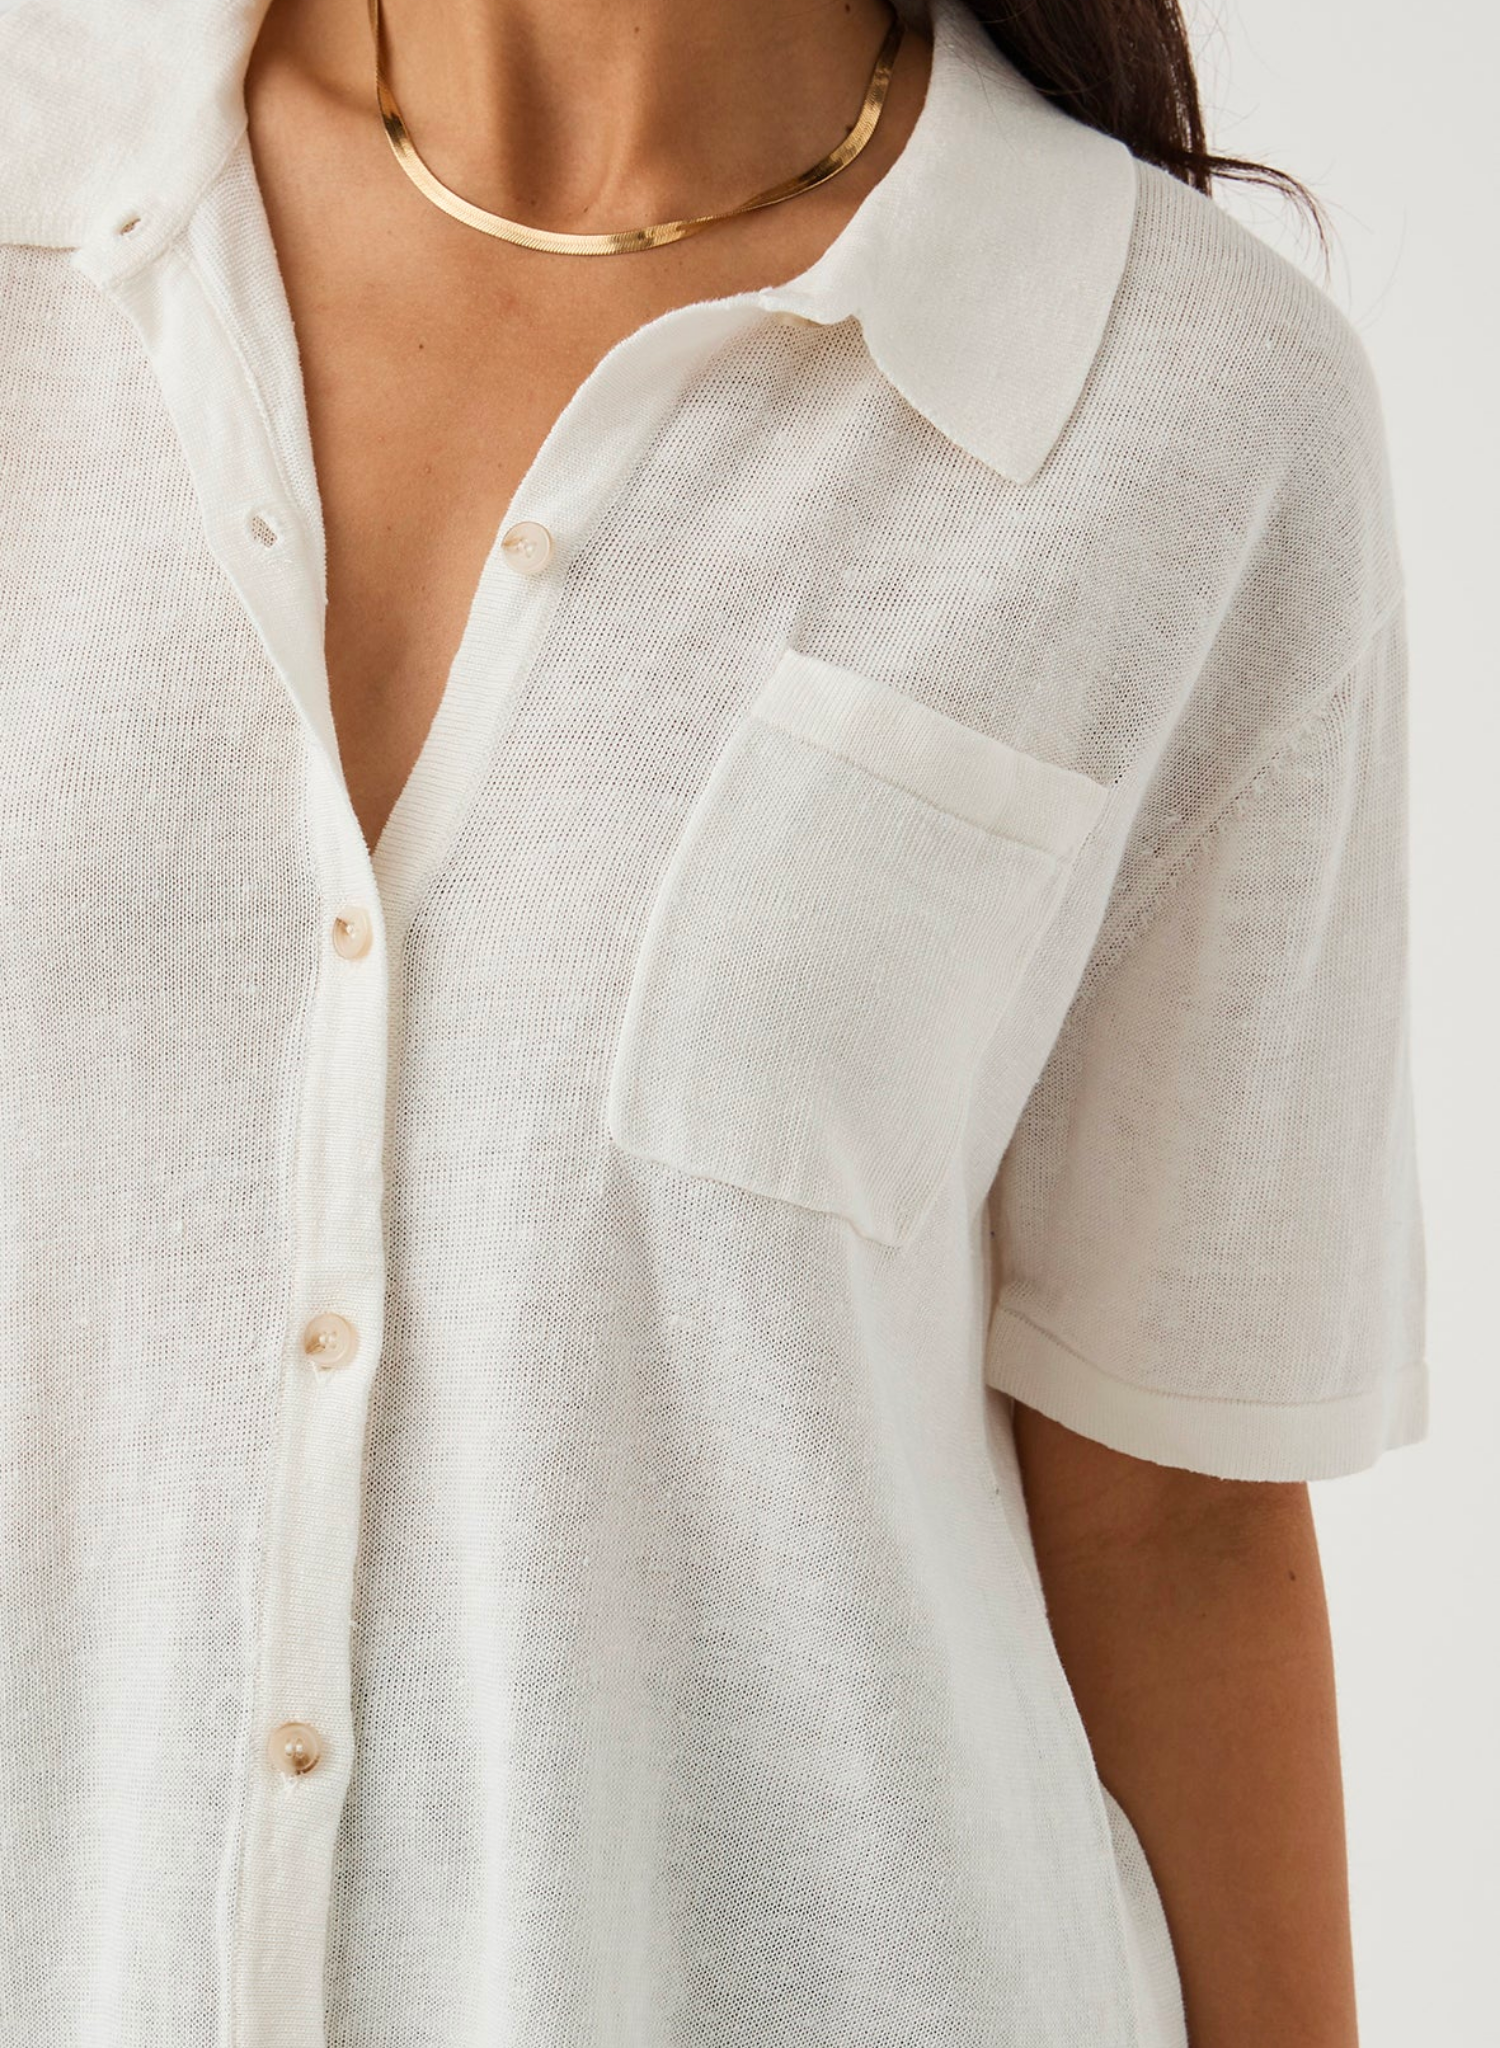 Brie Shirt in Cream. Button Down Front Front Pockets Short Sleeve Oversized Shirt Knitted Organic Linen Ethically produced Free of harmful chemicals: OEKO-TEX Standard 100 This piece is of 100% natural linen, carefully knitted with zero waste. With this is mind, this item appreciates good care so it can be enjoyed for seasons to come.